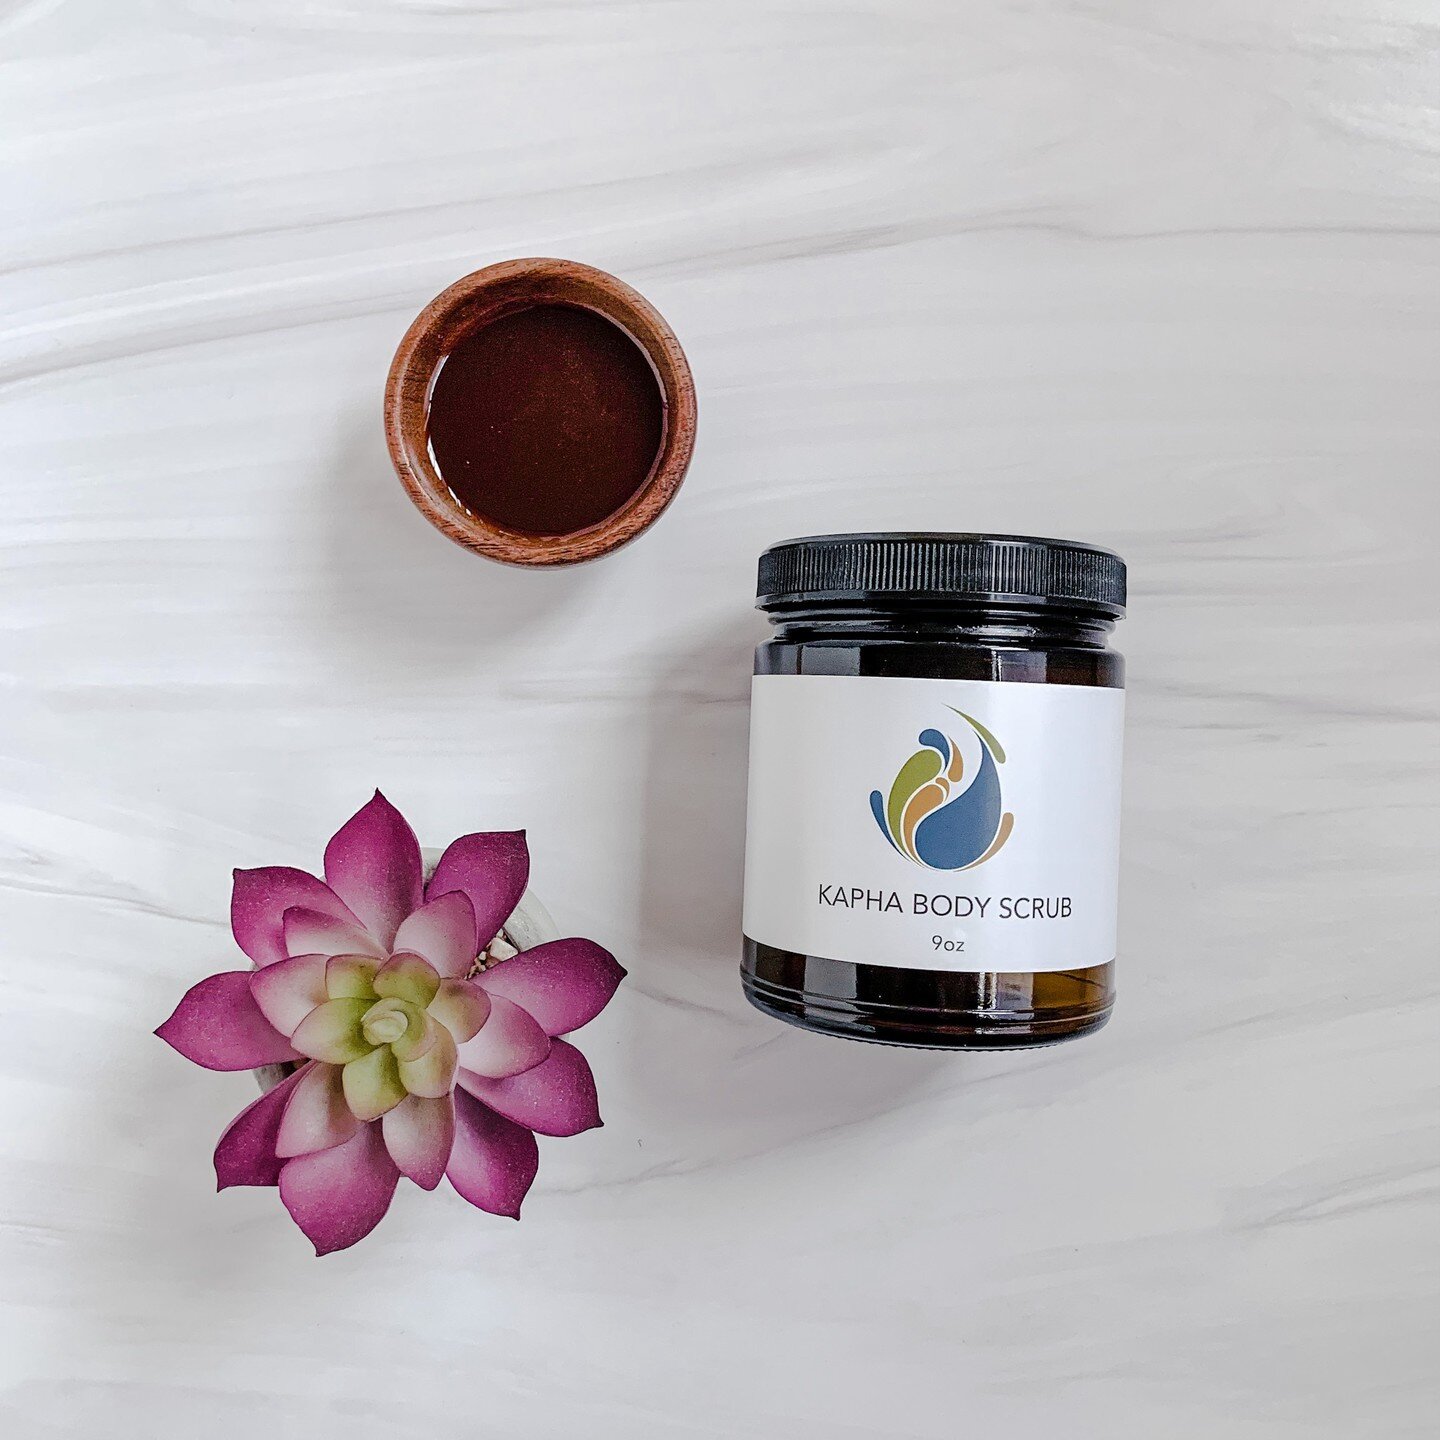 Body scrubs are a great way to detoxify, move lymph, and increase circulation, and moisturizing the skin; all of which pacify Kapha dosha this spring.

Are you ready to experience the softest, smoothest skin you've had?!

Our 𝑲𝒂𝒑𝒉𝒂 𝑩𝒐𝒅𝒚 𝑺𝒄